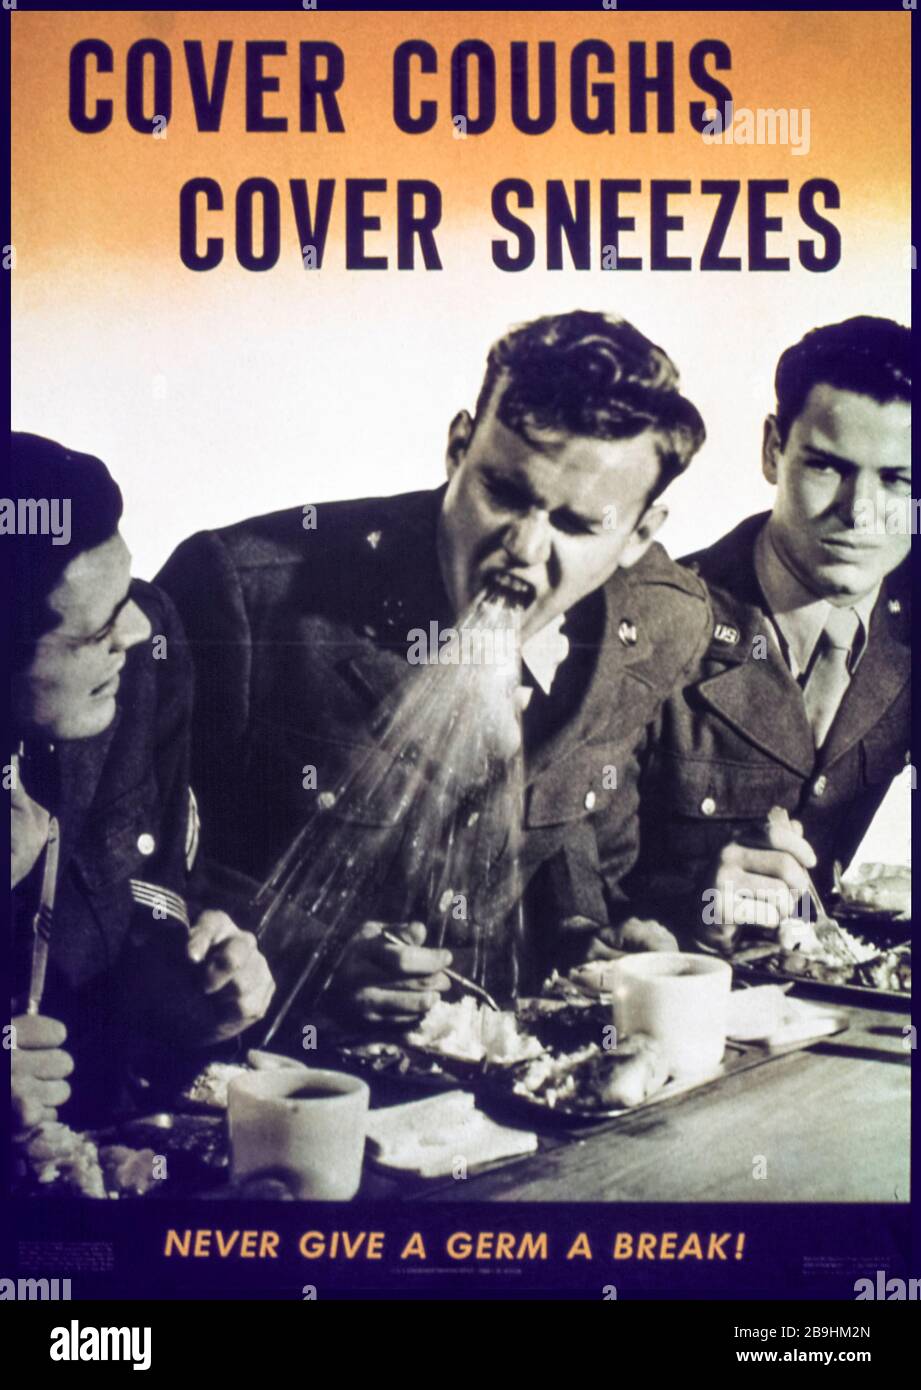 American WW2 Cover Coughs Cover Sneezes, Disease Prevention campaign poster, 1941-1945 Stock Photo